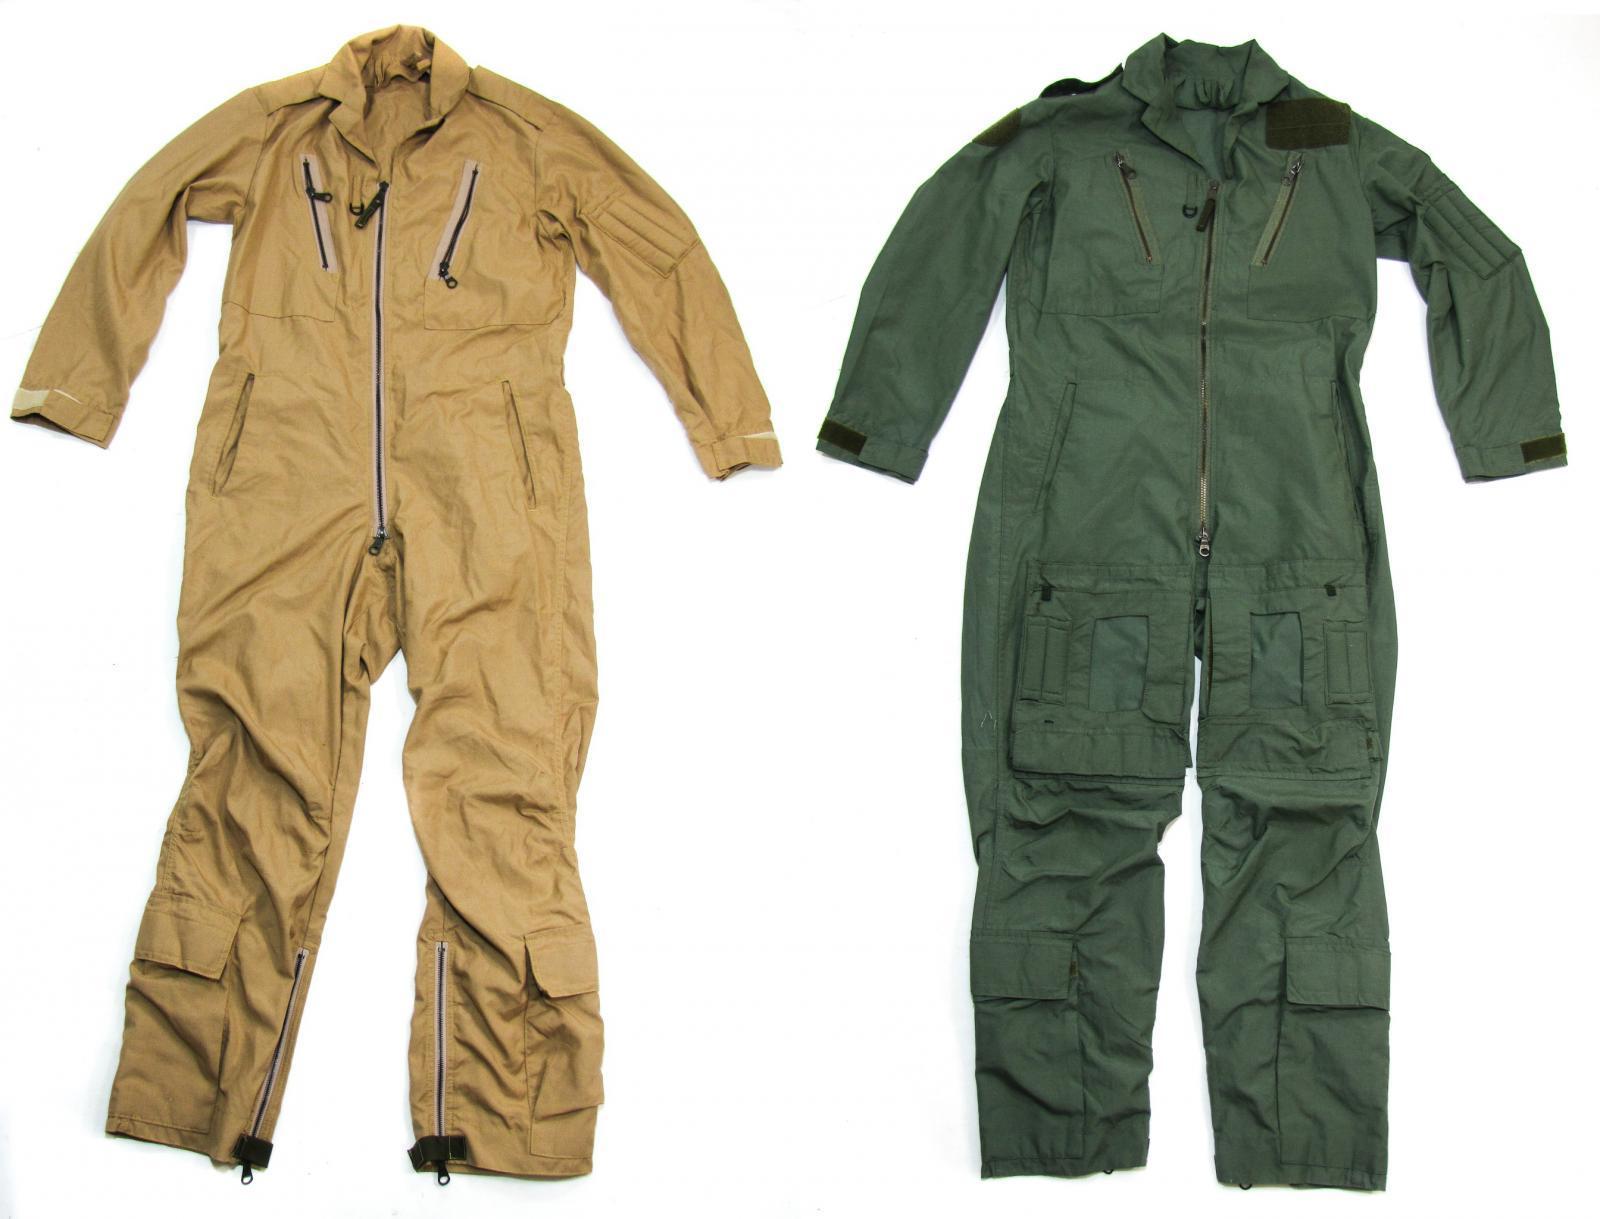 New RAF Issue Aircrew Waterproof Winterland Green Coverall Jacket Various Sizes